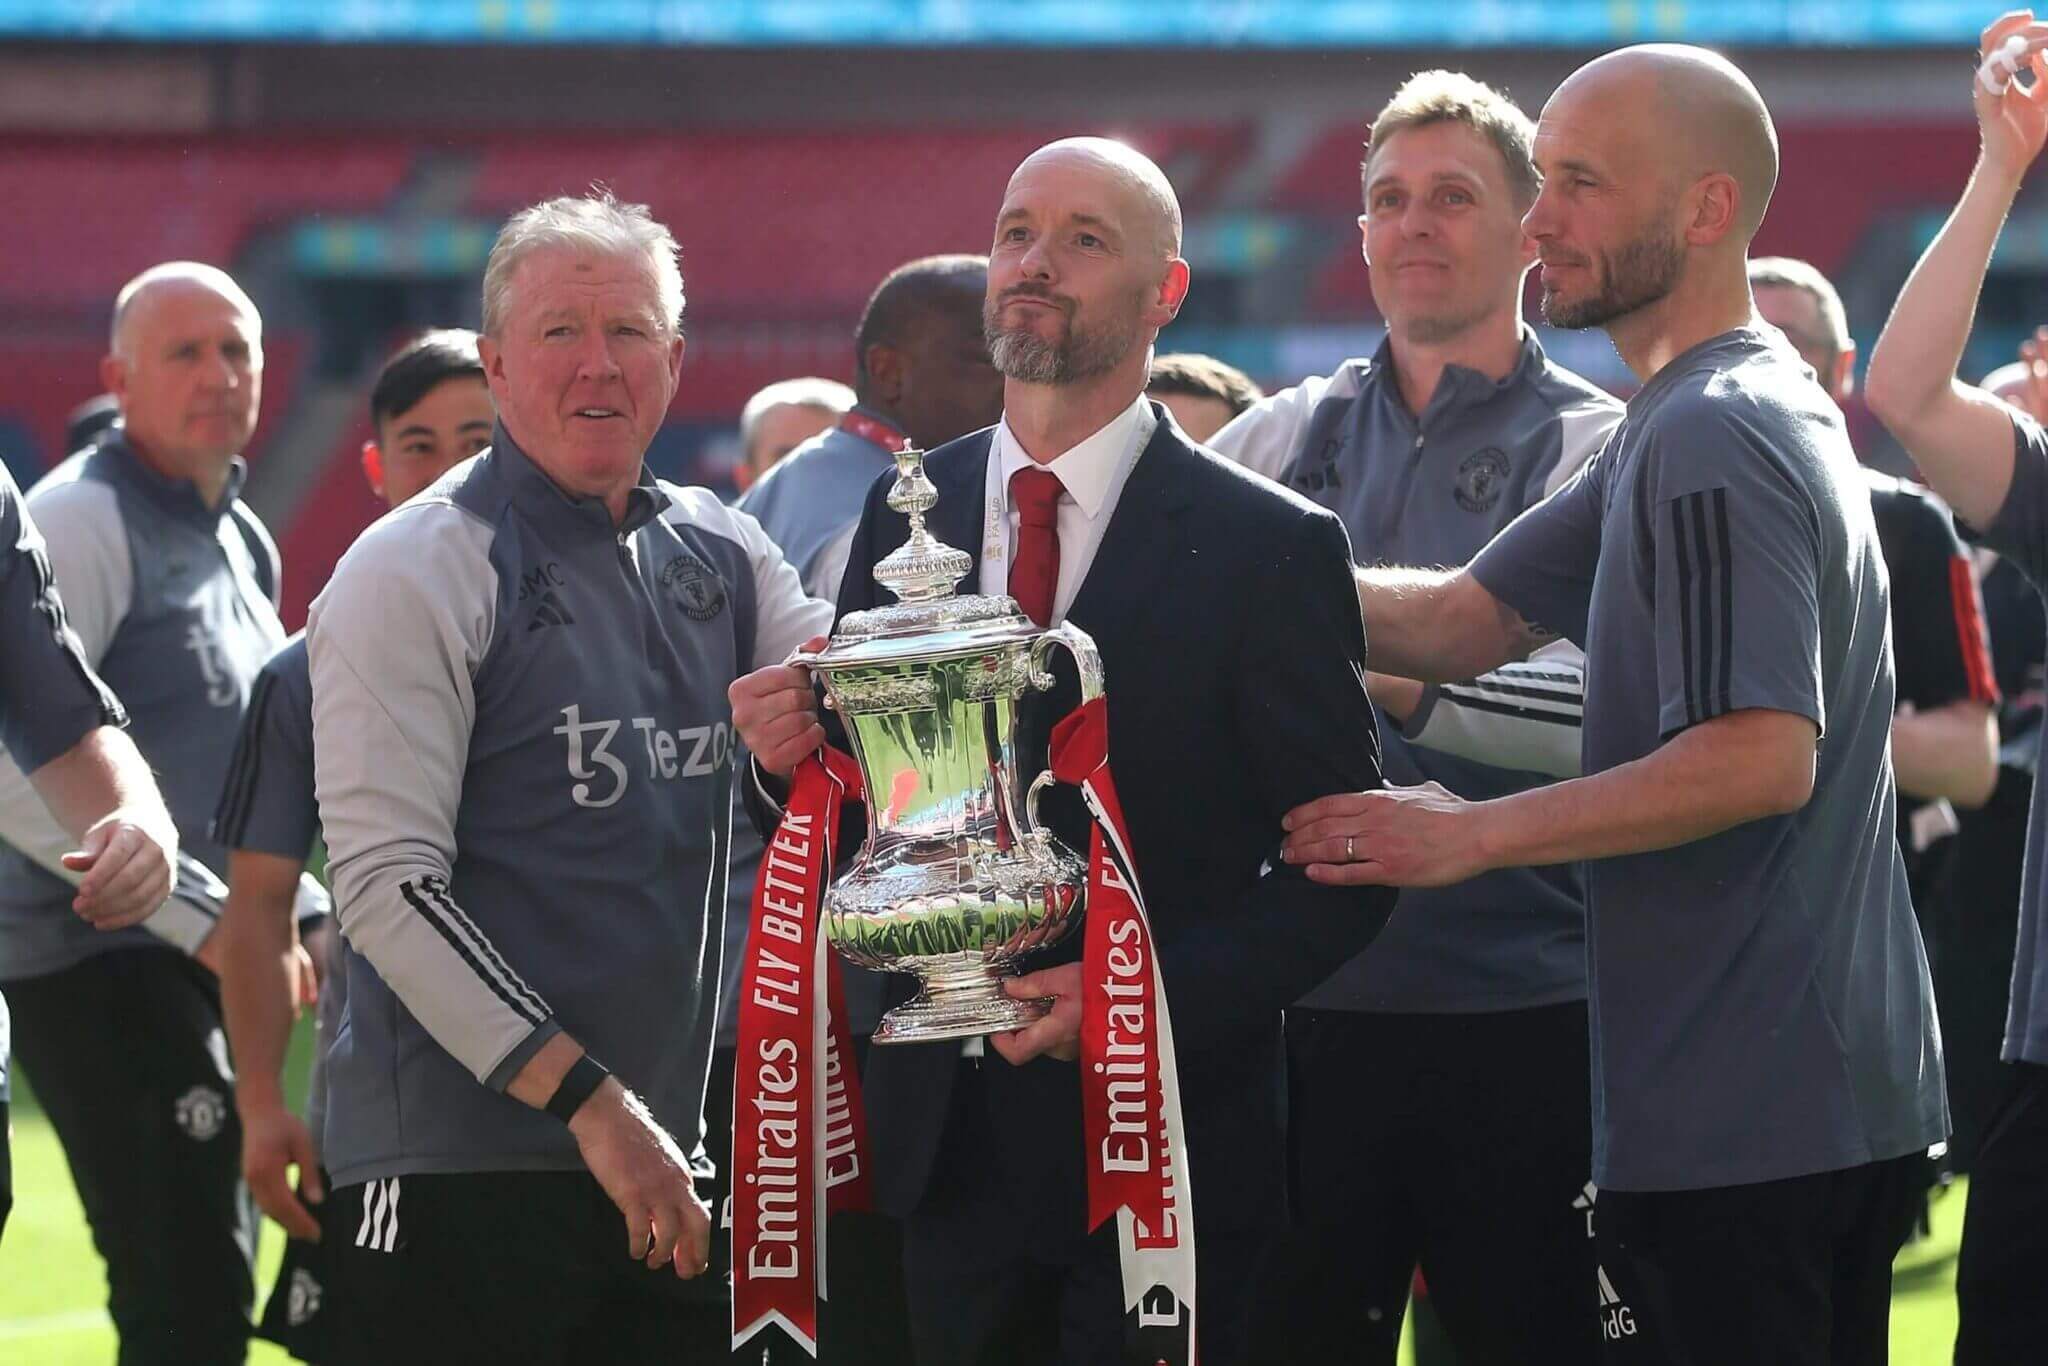 Ten Hag led United to FA Cup victory in May (Crystal Becks/MP Media/Getty Images)